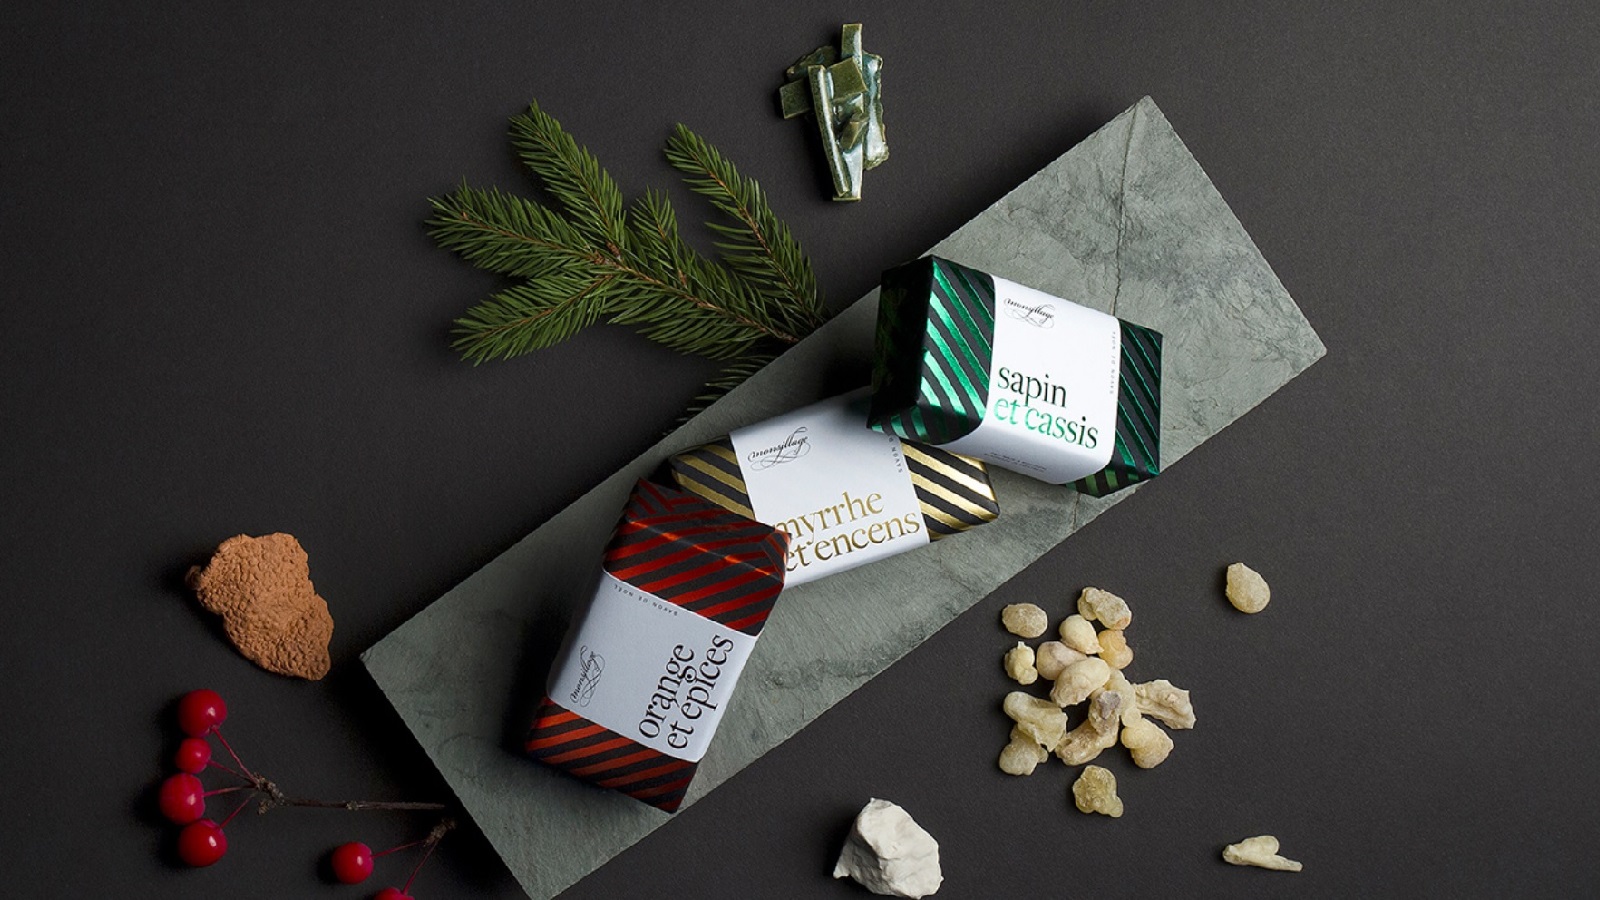 Soap Packaging Inspired by Christmas Traditions